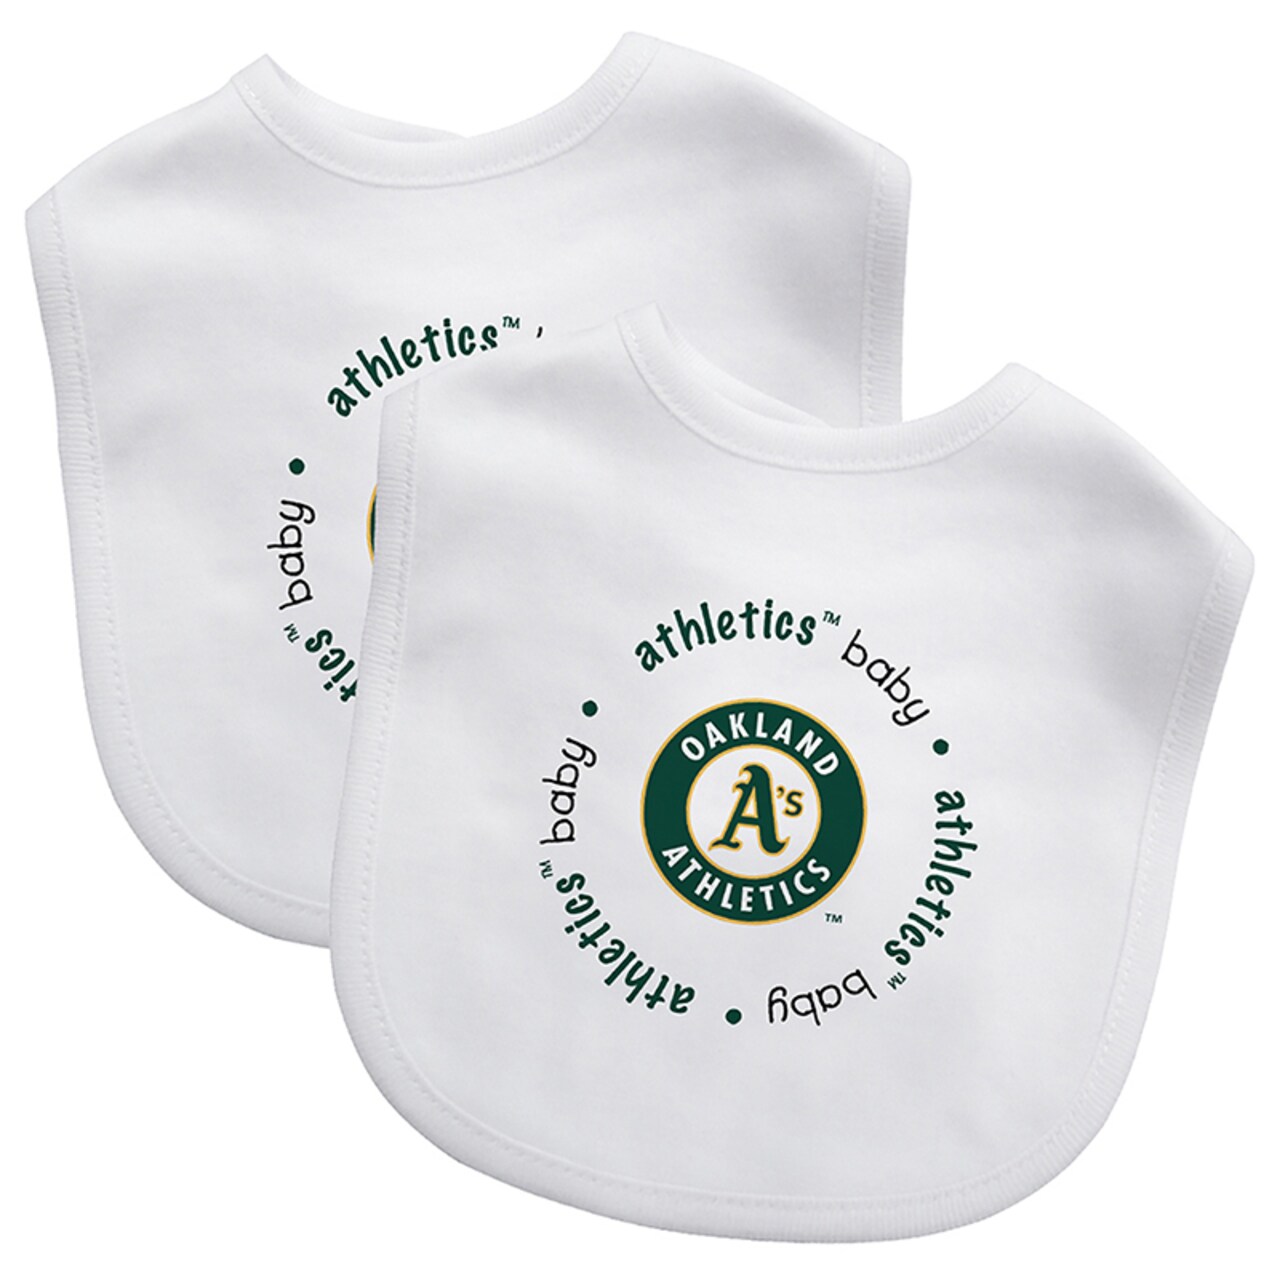 Baby Fanatic   Officially Licensed Unisex Baby Bibs 2 Pack - MLB Oakland Athletics